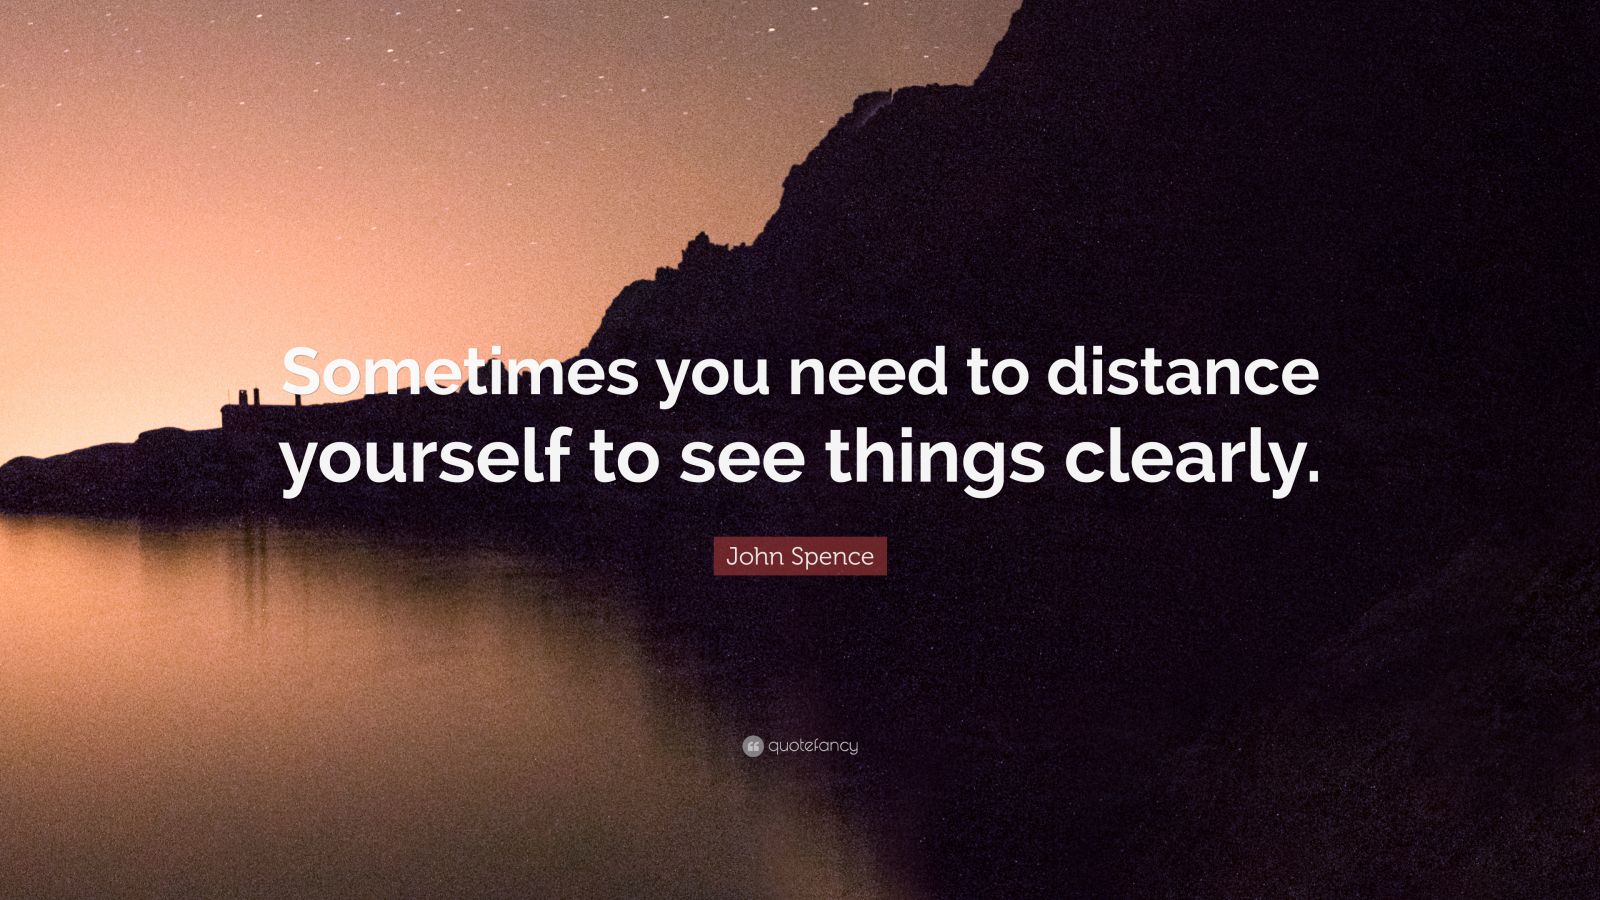 John Spence Quote “sometimes You Need To Distance Yourself To See